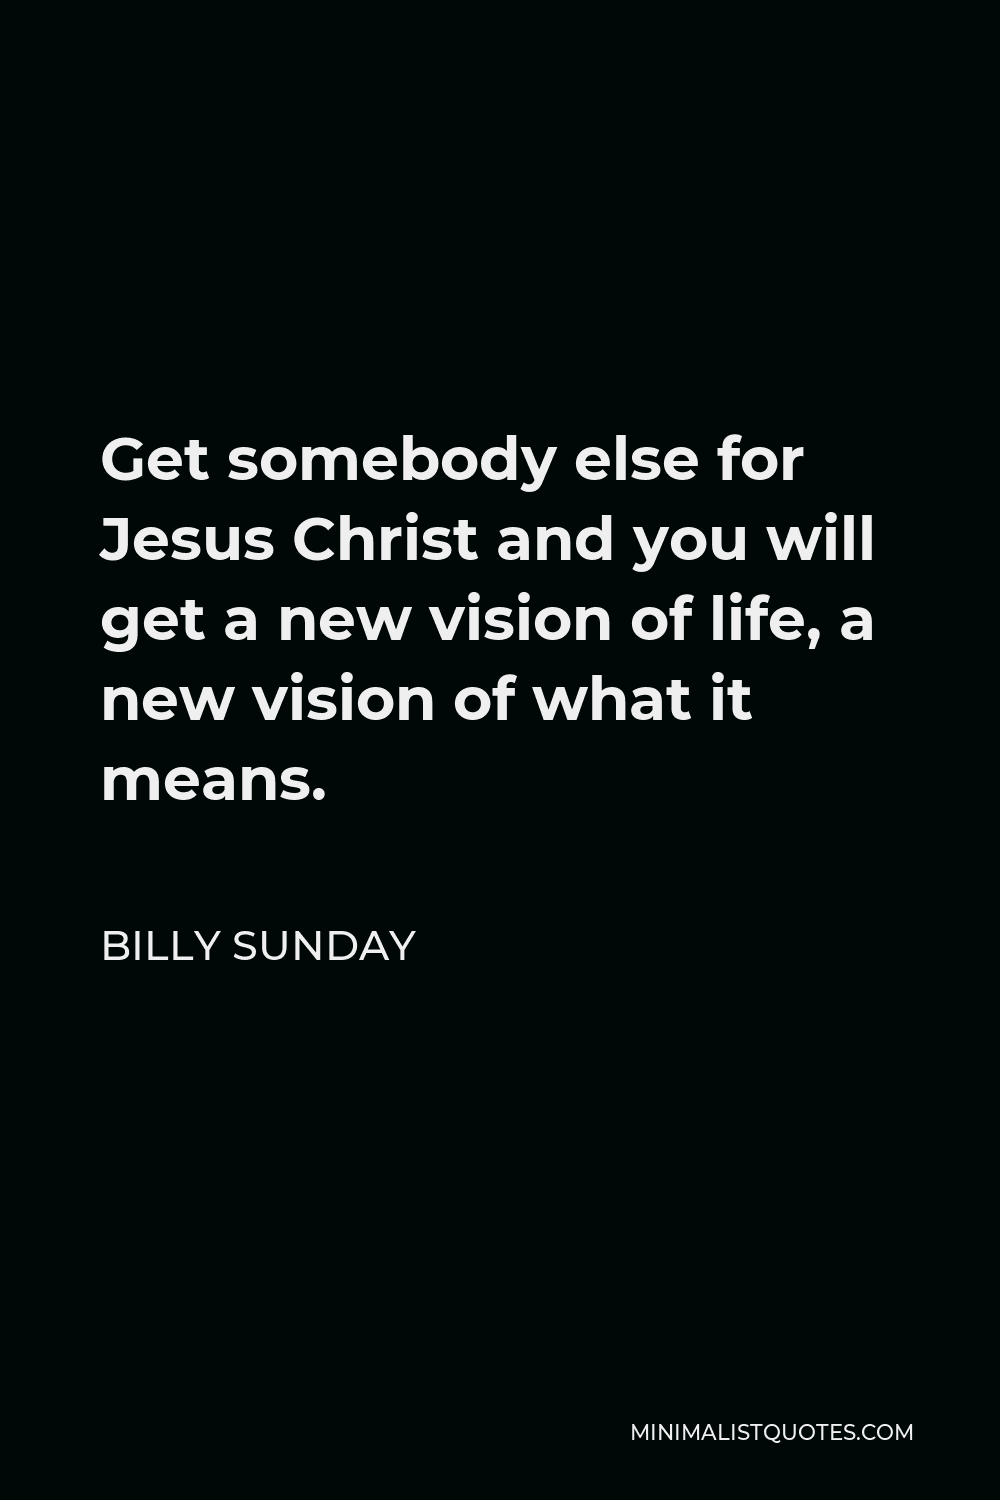 Billy Sunday Quote - Get somebody else for Jesus Christ and you will get a new vision of life, a new vision of what it means.